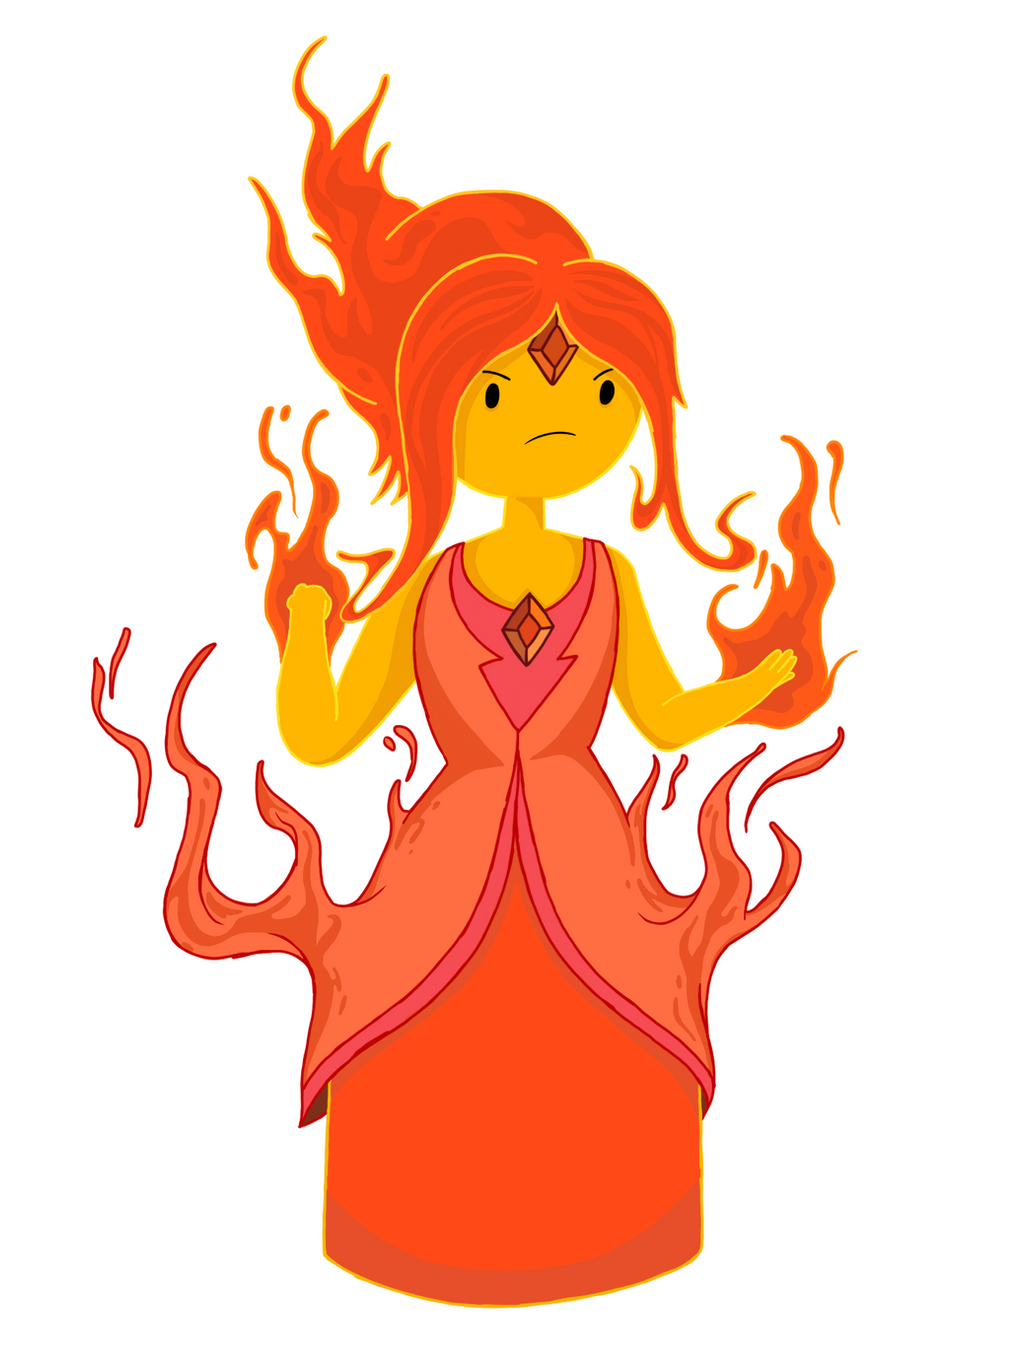 Flame princess would first appear in the issue adventure time #3 written by...